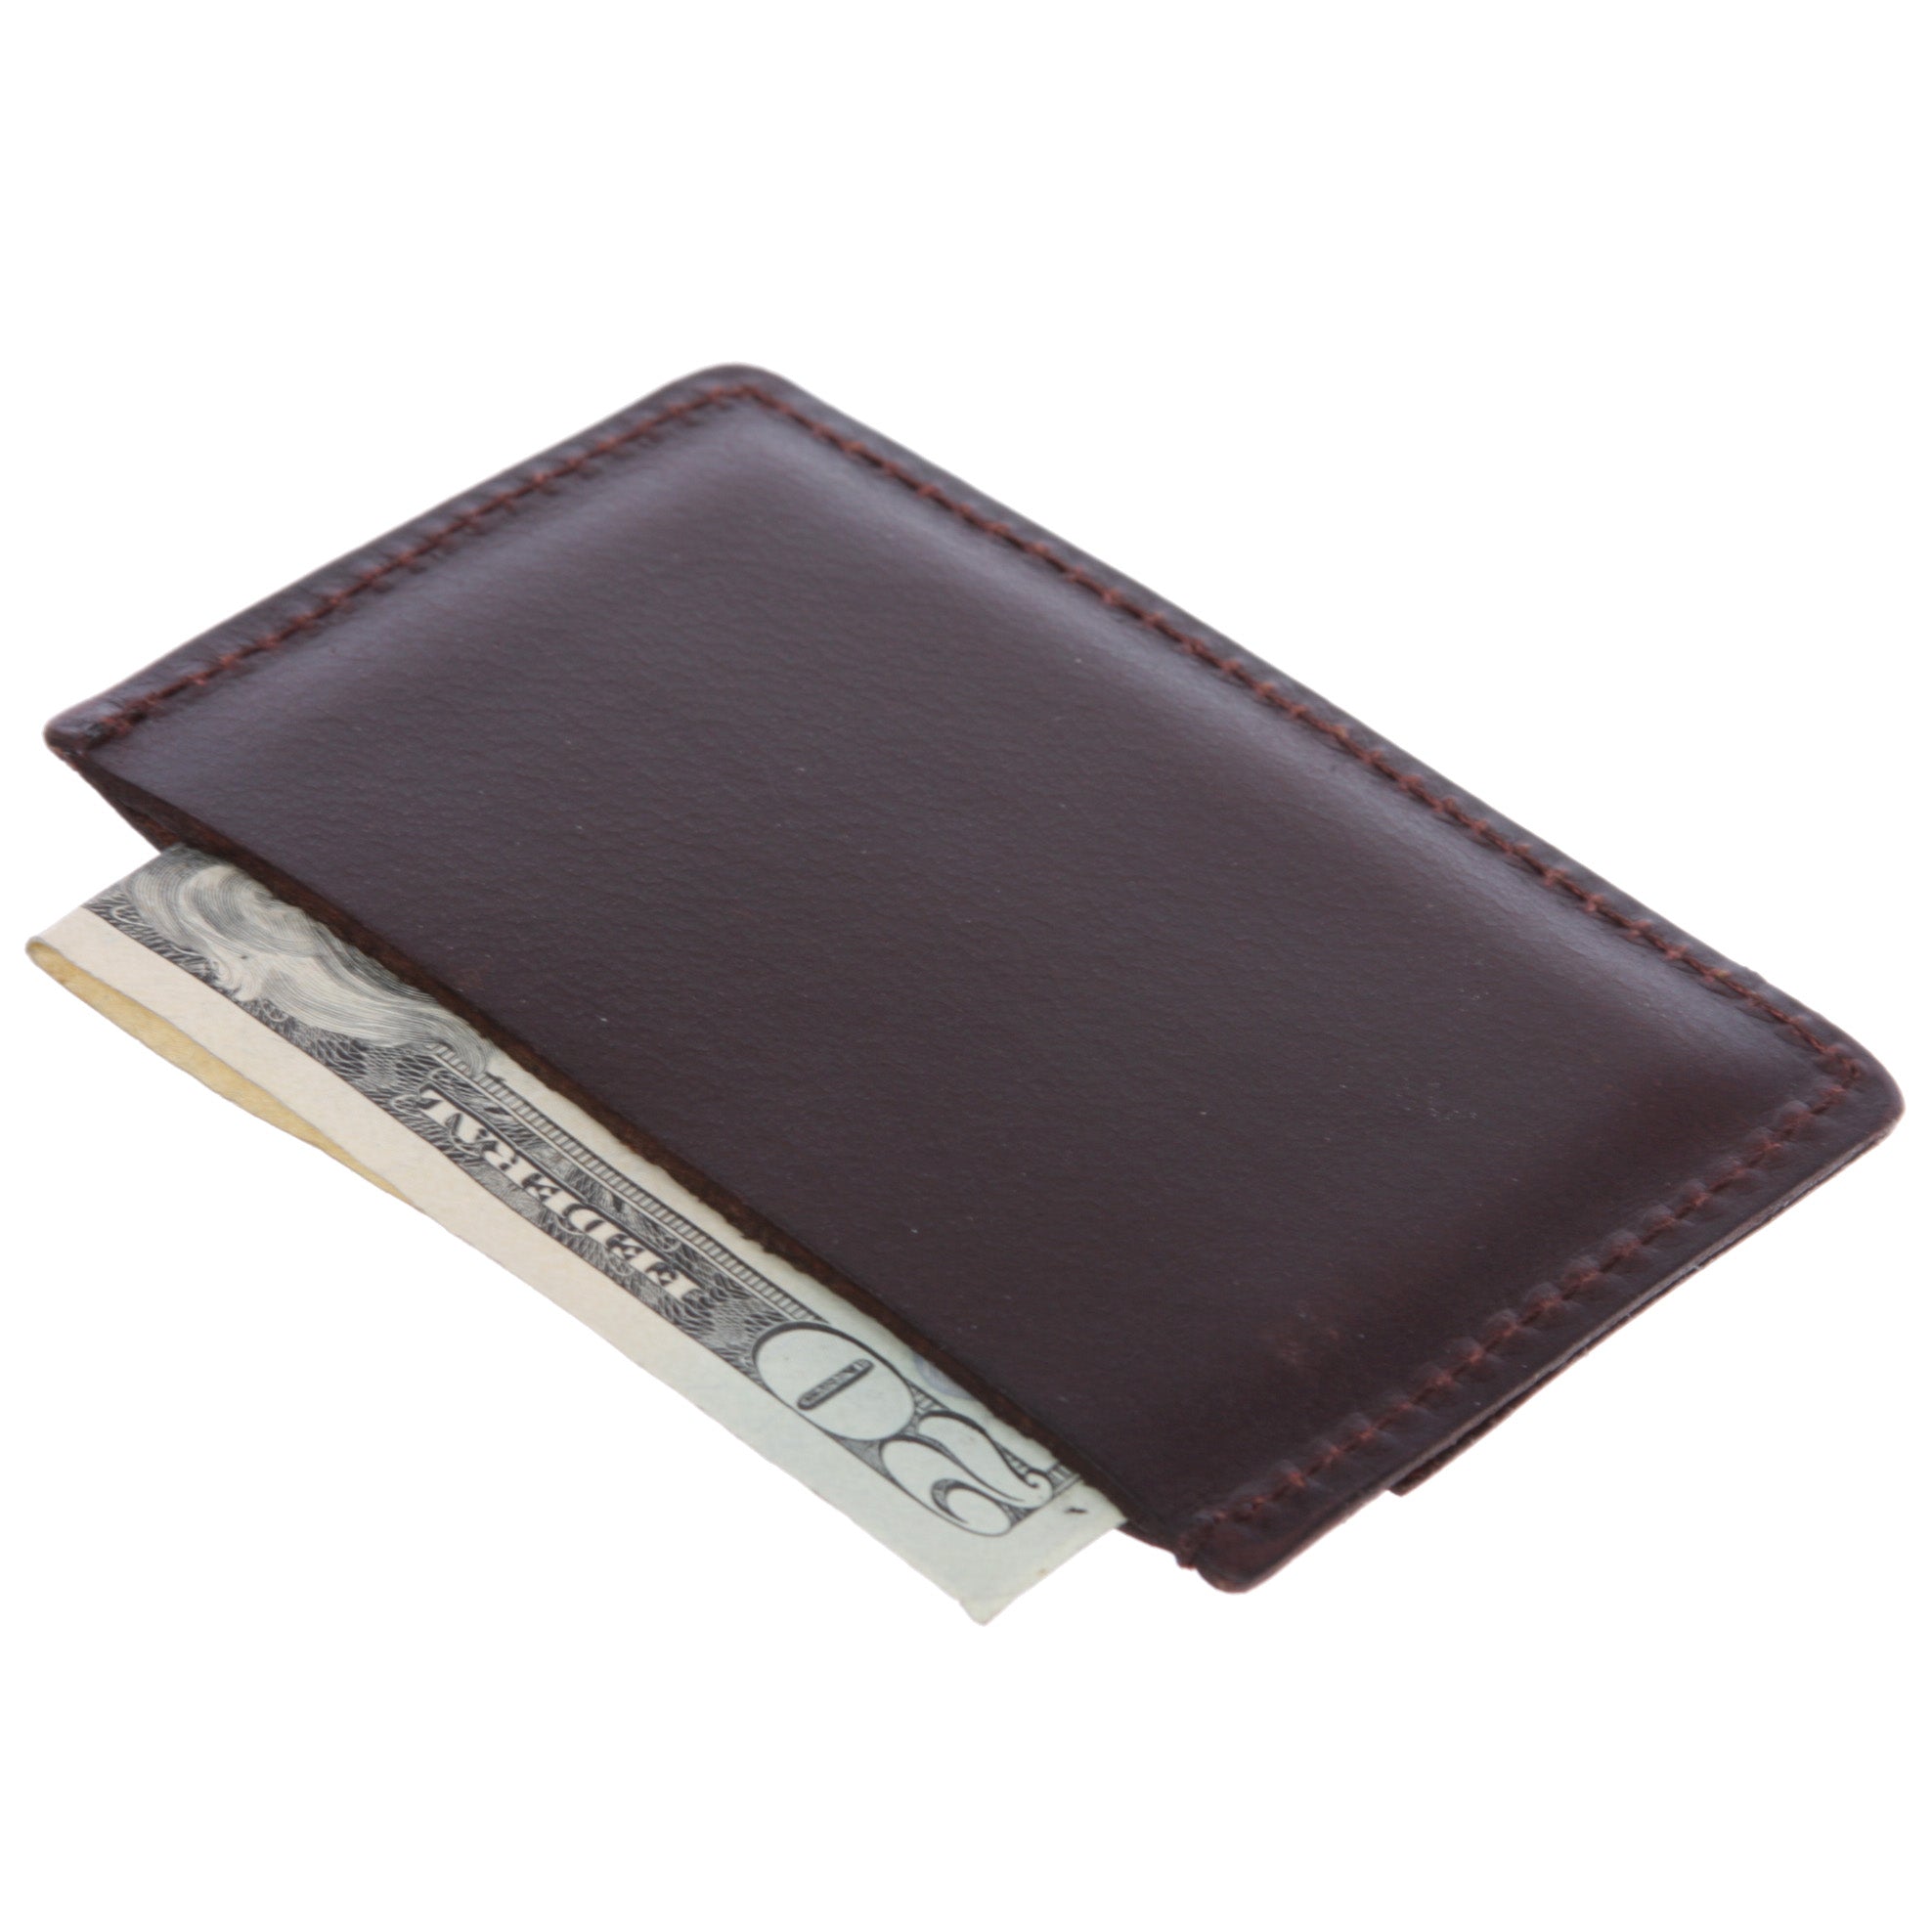 Micro Sleeve, Slim Leather Card & Cash Holder Wallet (Max. 3 cards and cash)